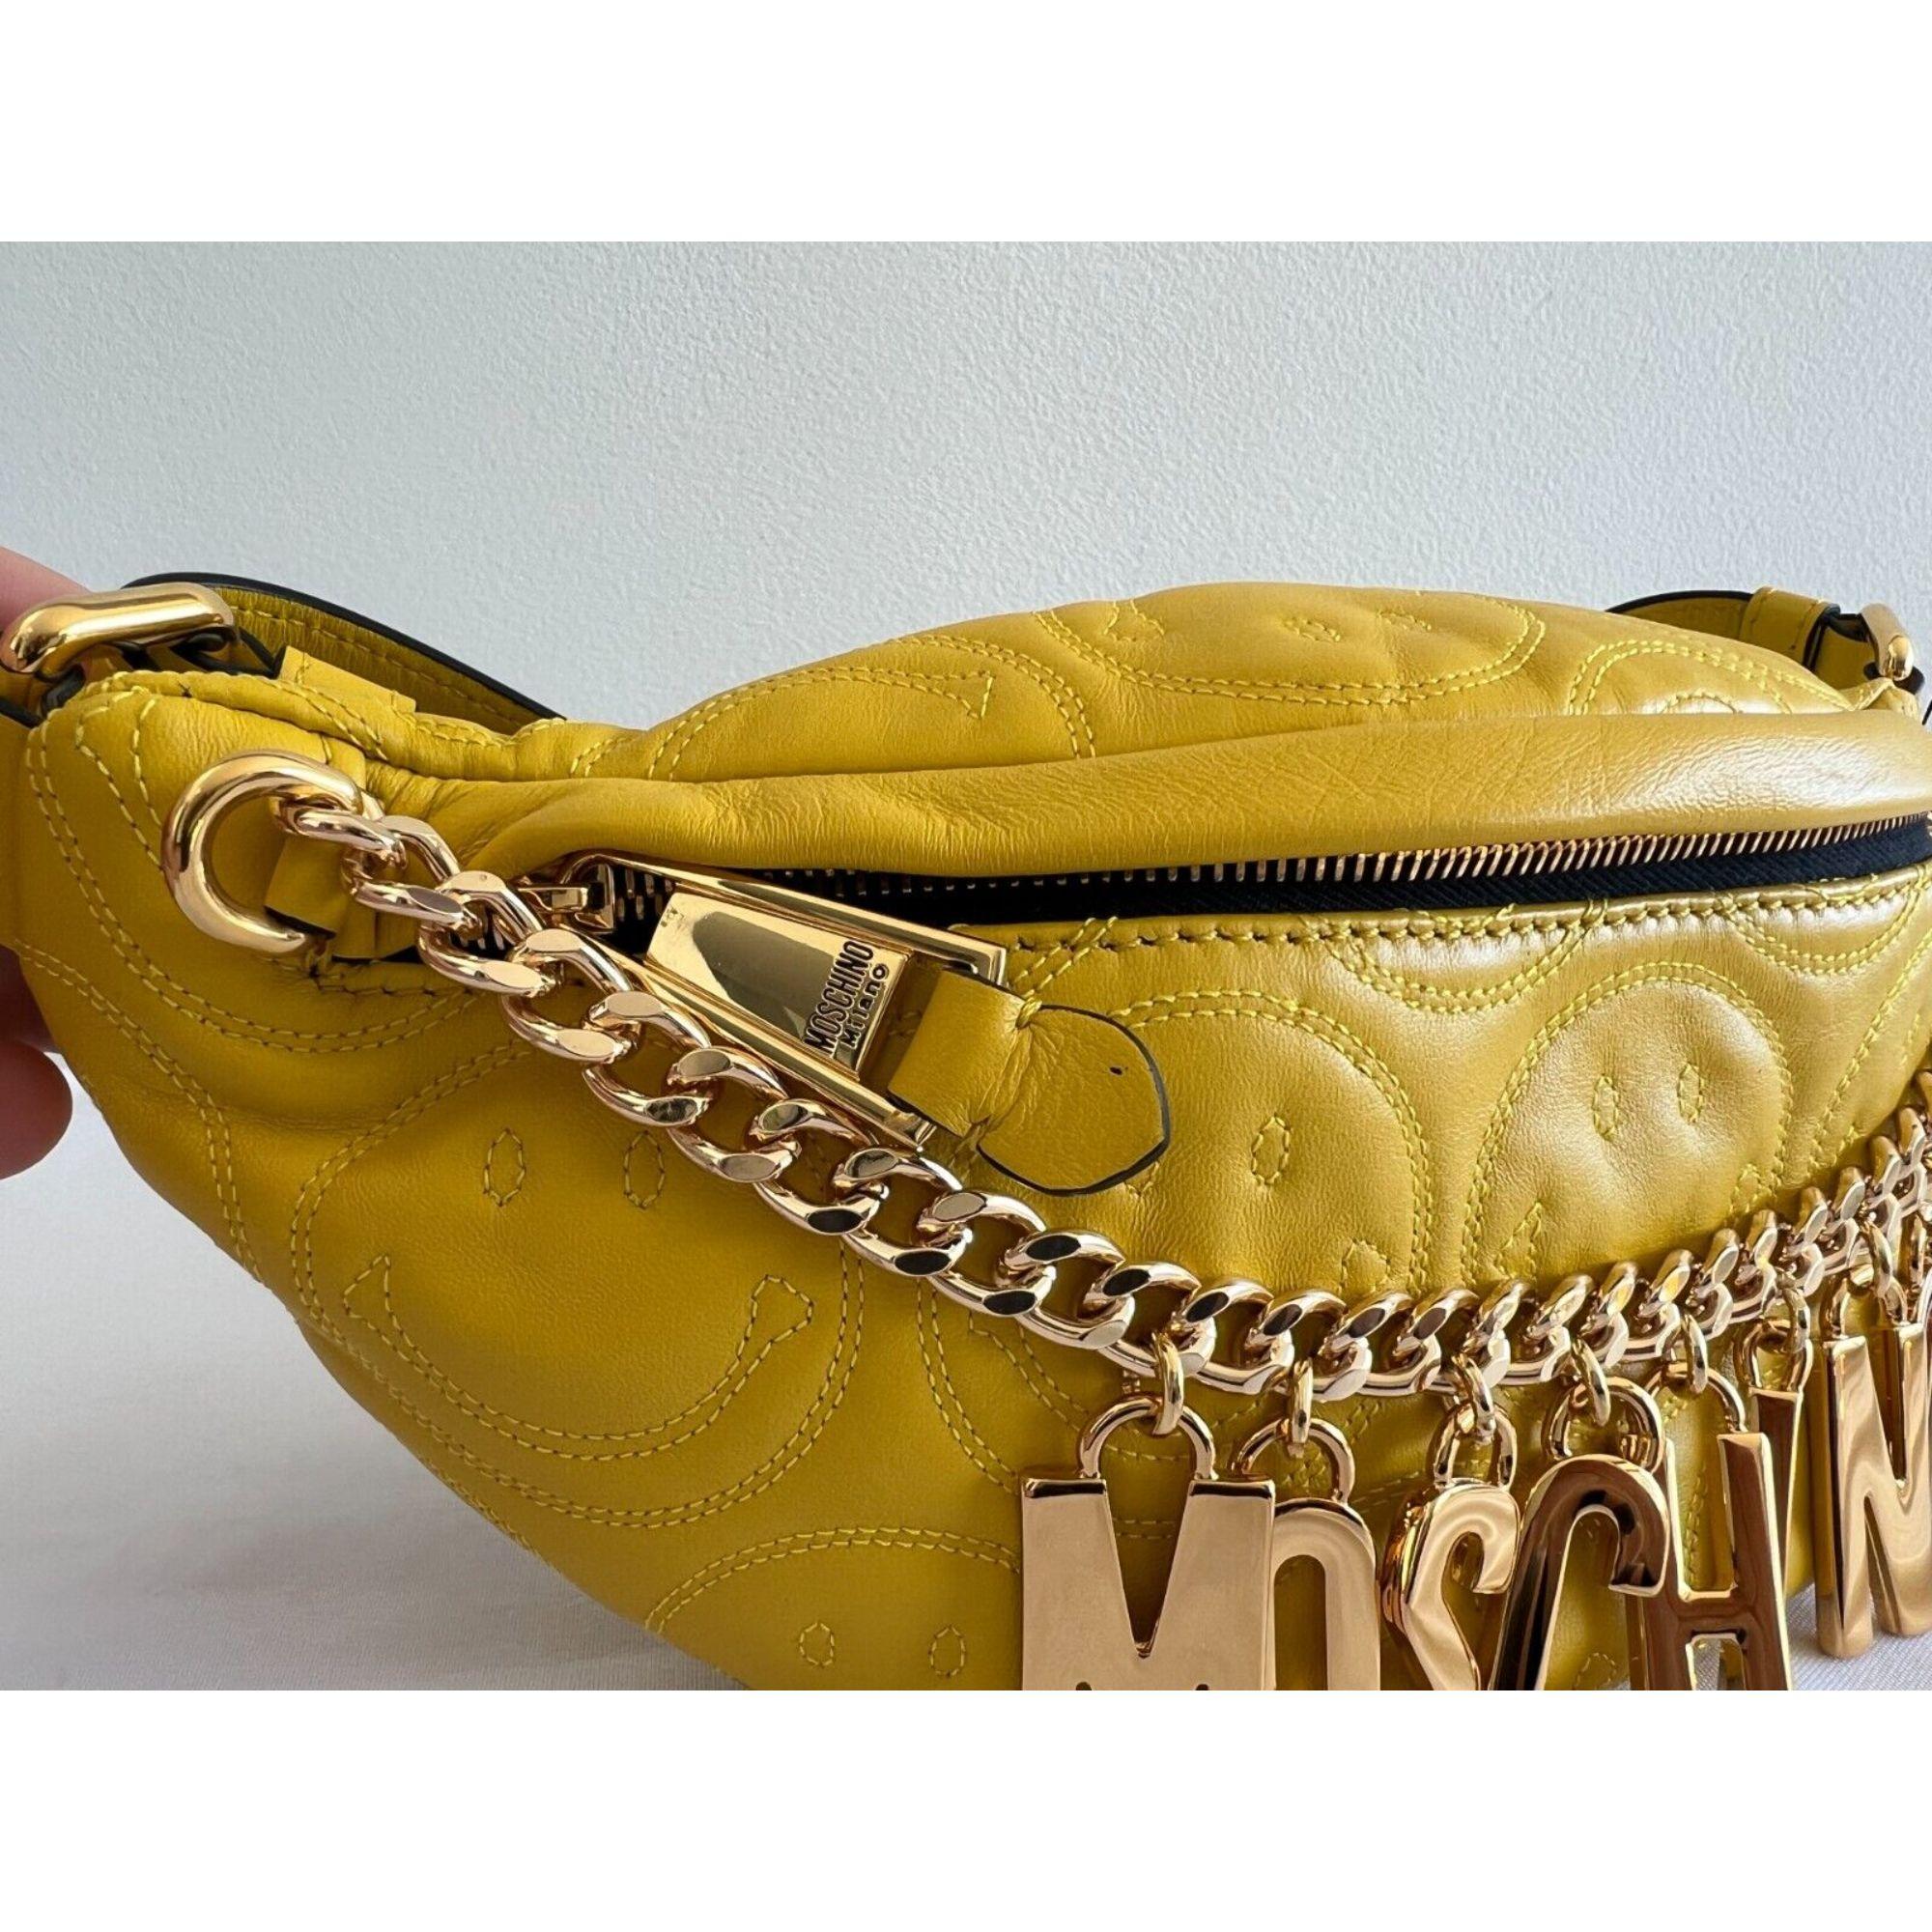 SS21 Moschino Couture Yellow Fanny Pack with Engraved Smiley by Jeremy Scott For Sale 6